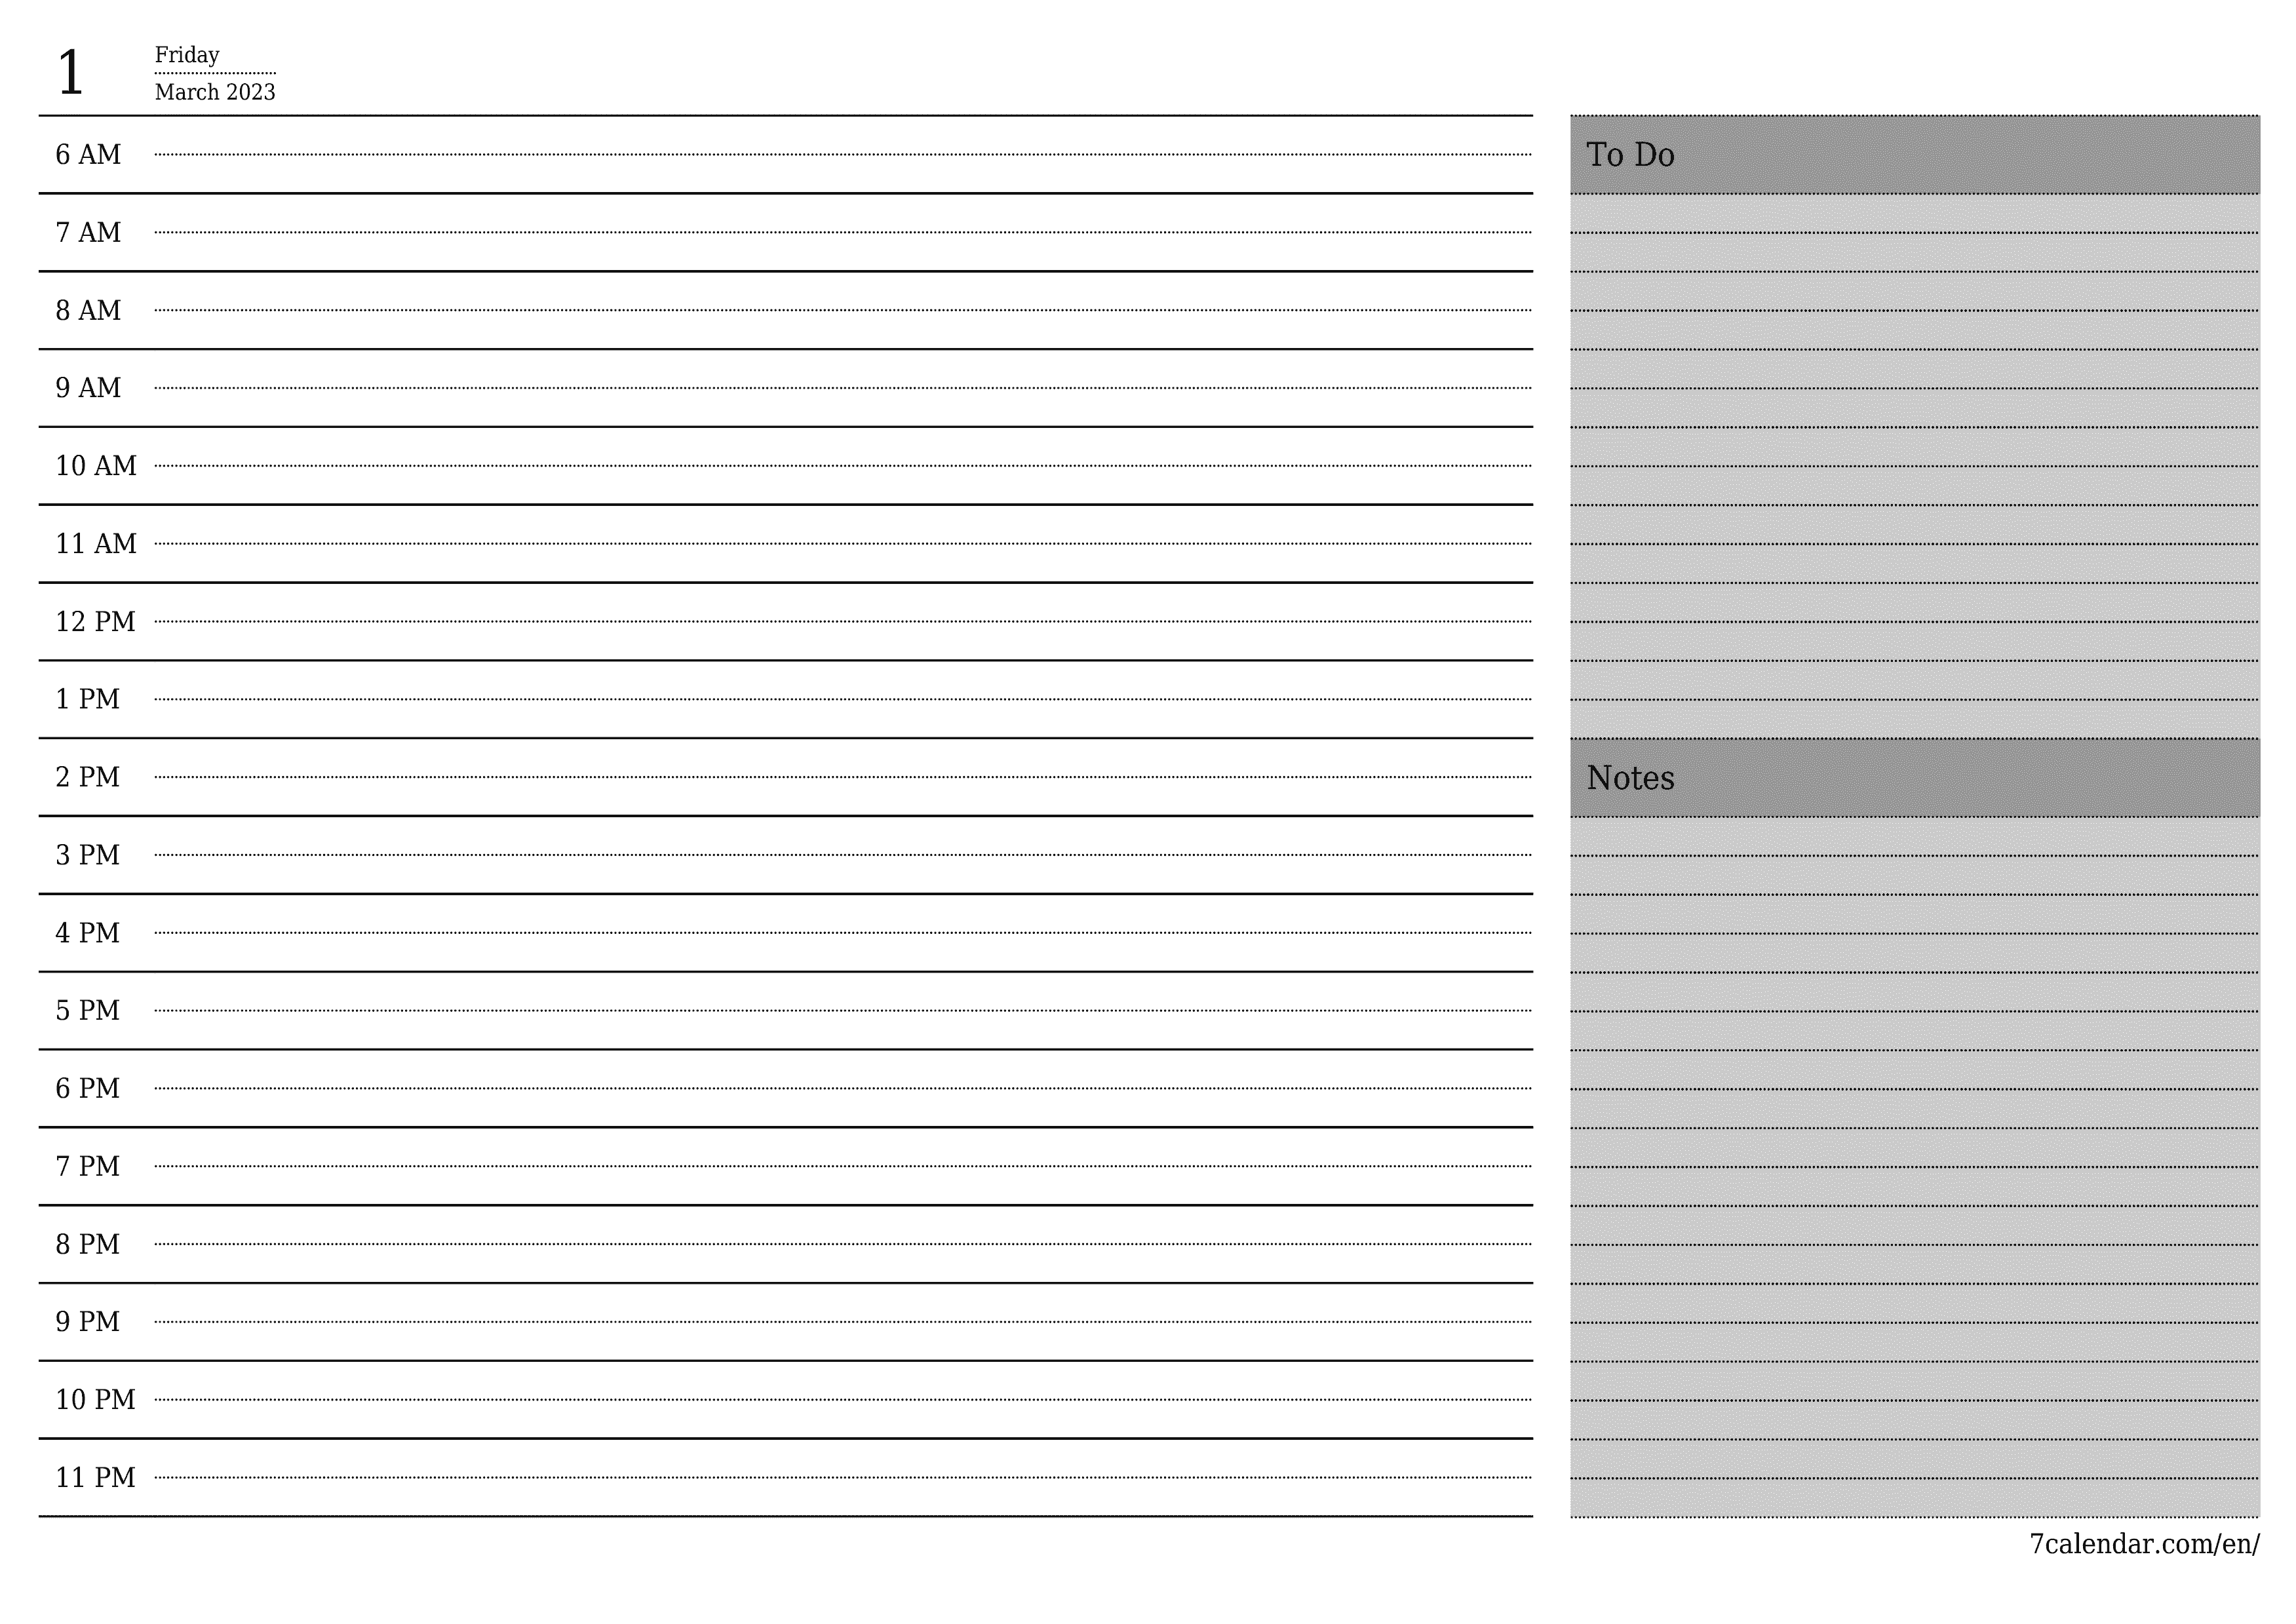 Blank daily printable calendar and planner for day March 2023 with notes, save and print to PDF PNG English - 7calendar.com